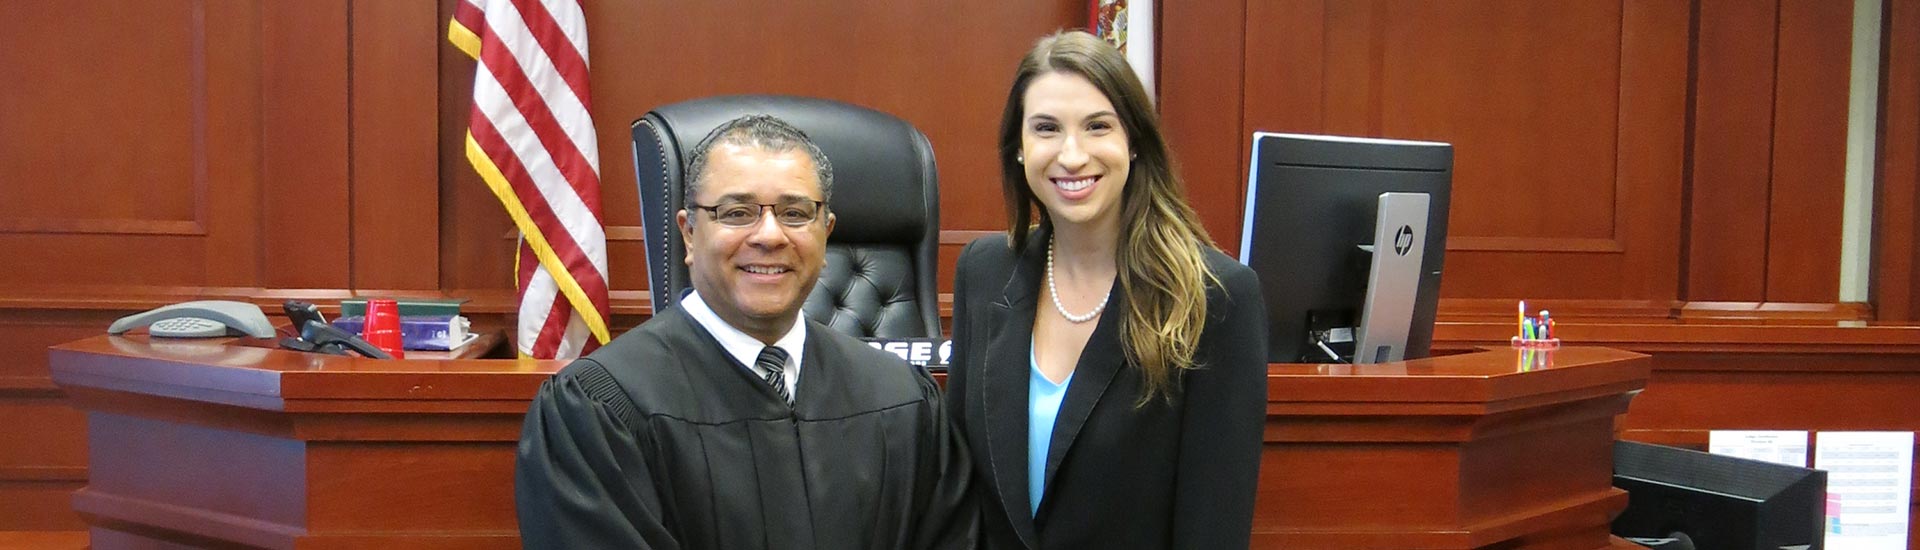 Alyson G. Morelli with Judge in Courtroom